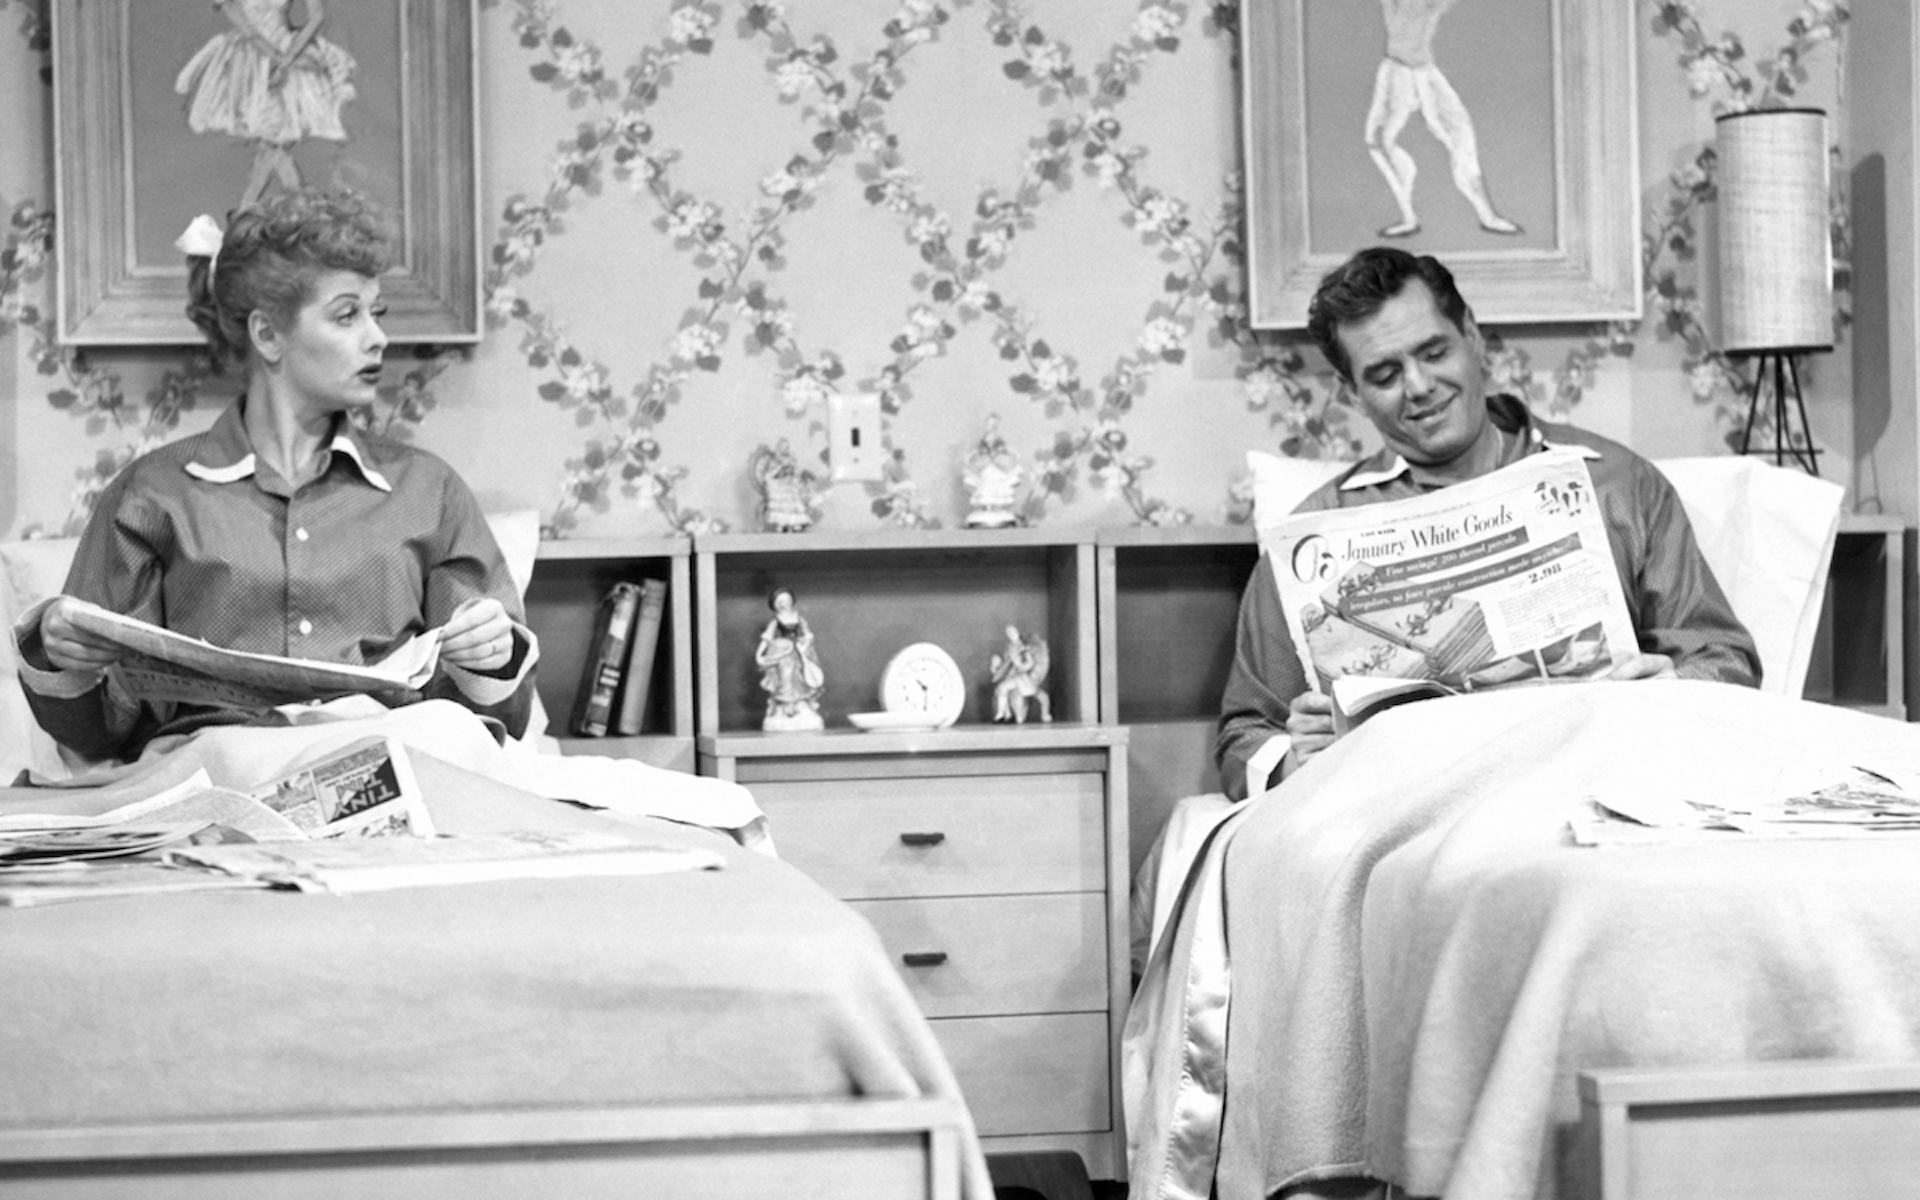 Back and white image of a couple in separate beds sleeping apart